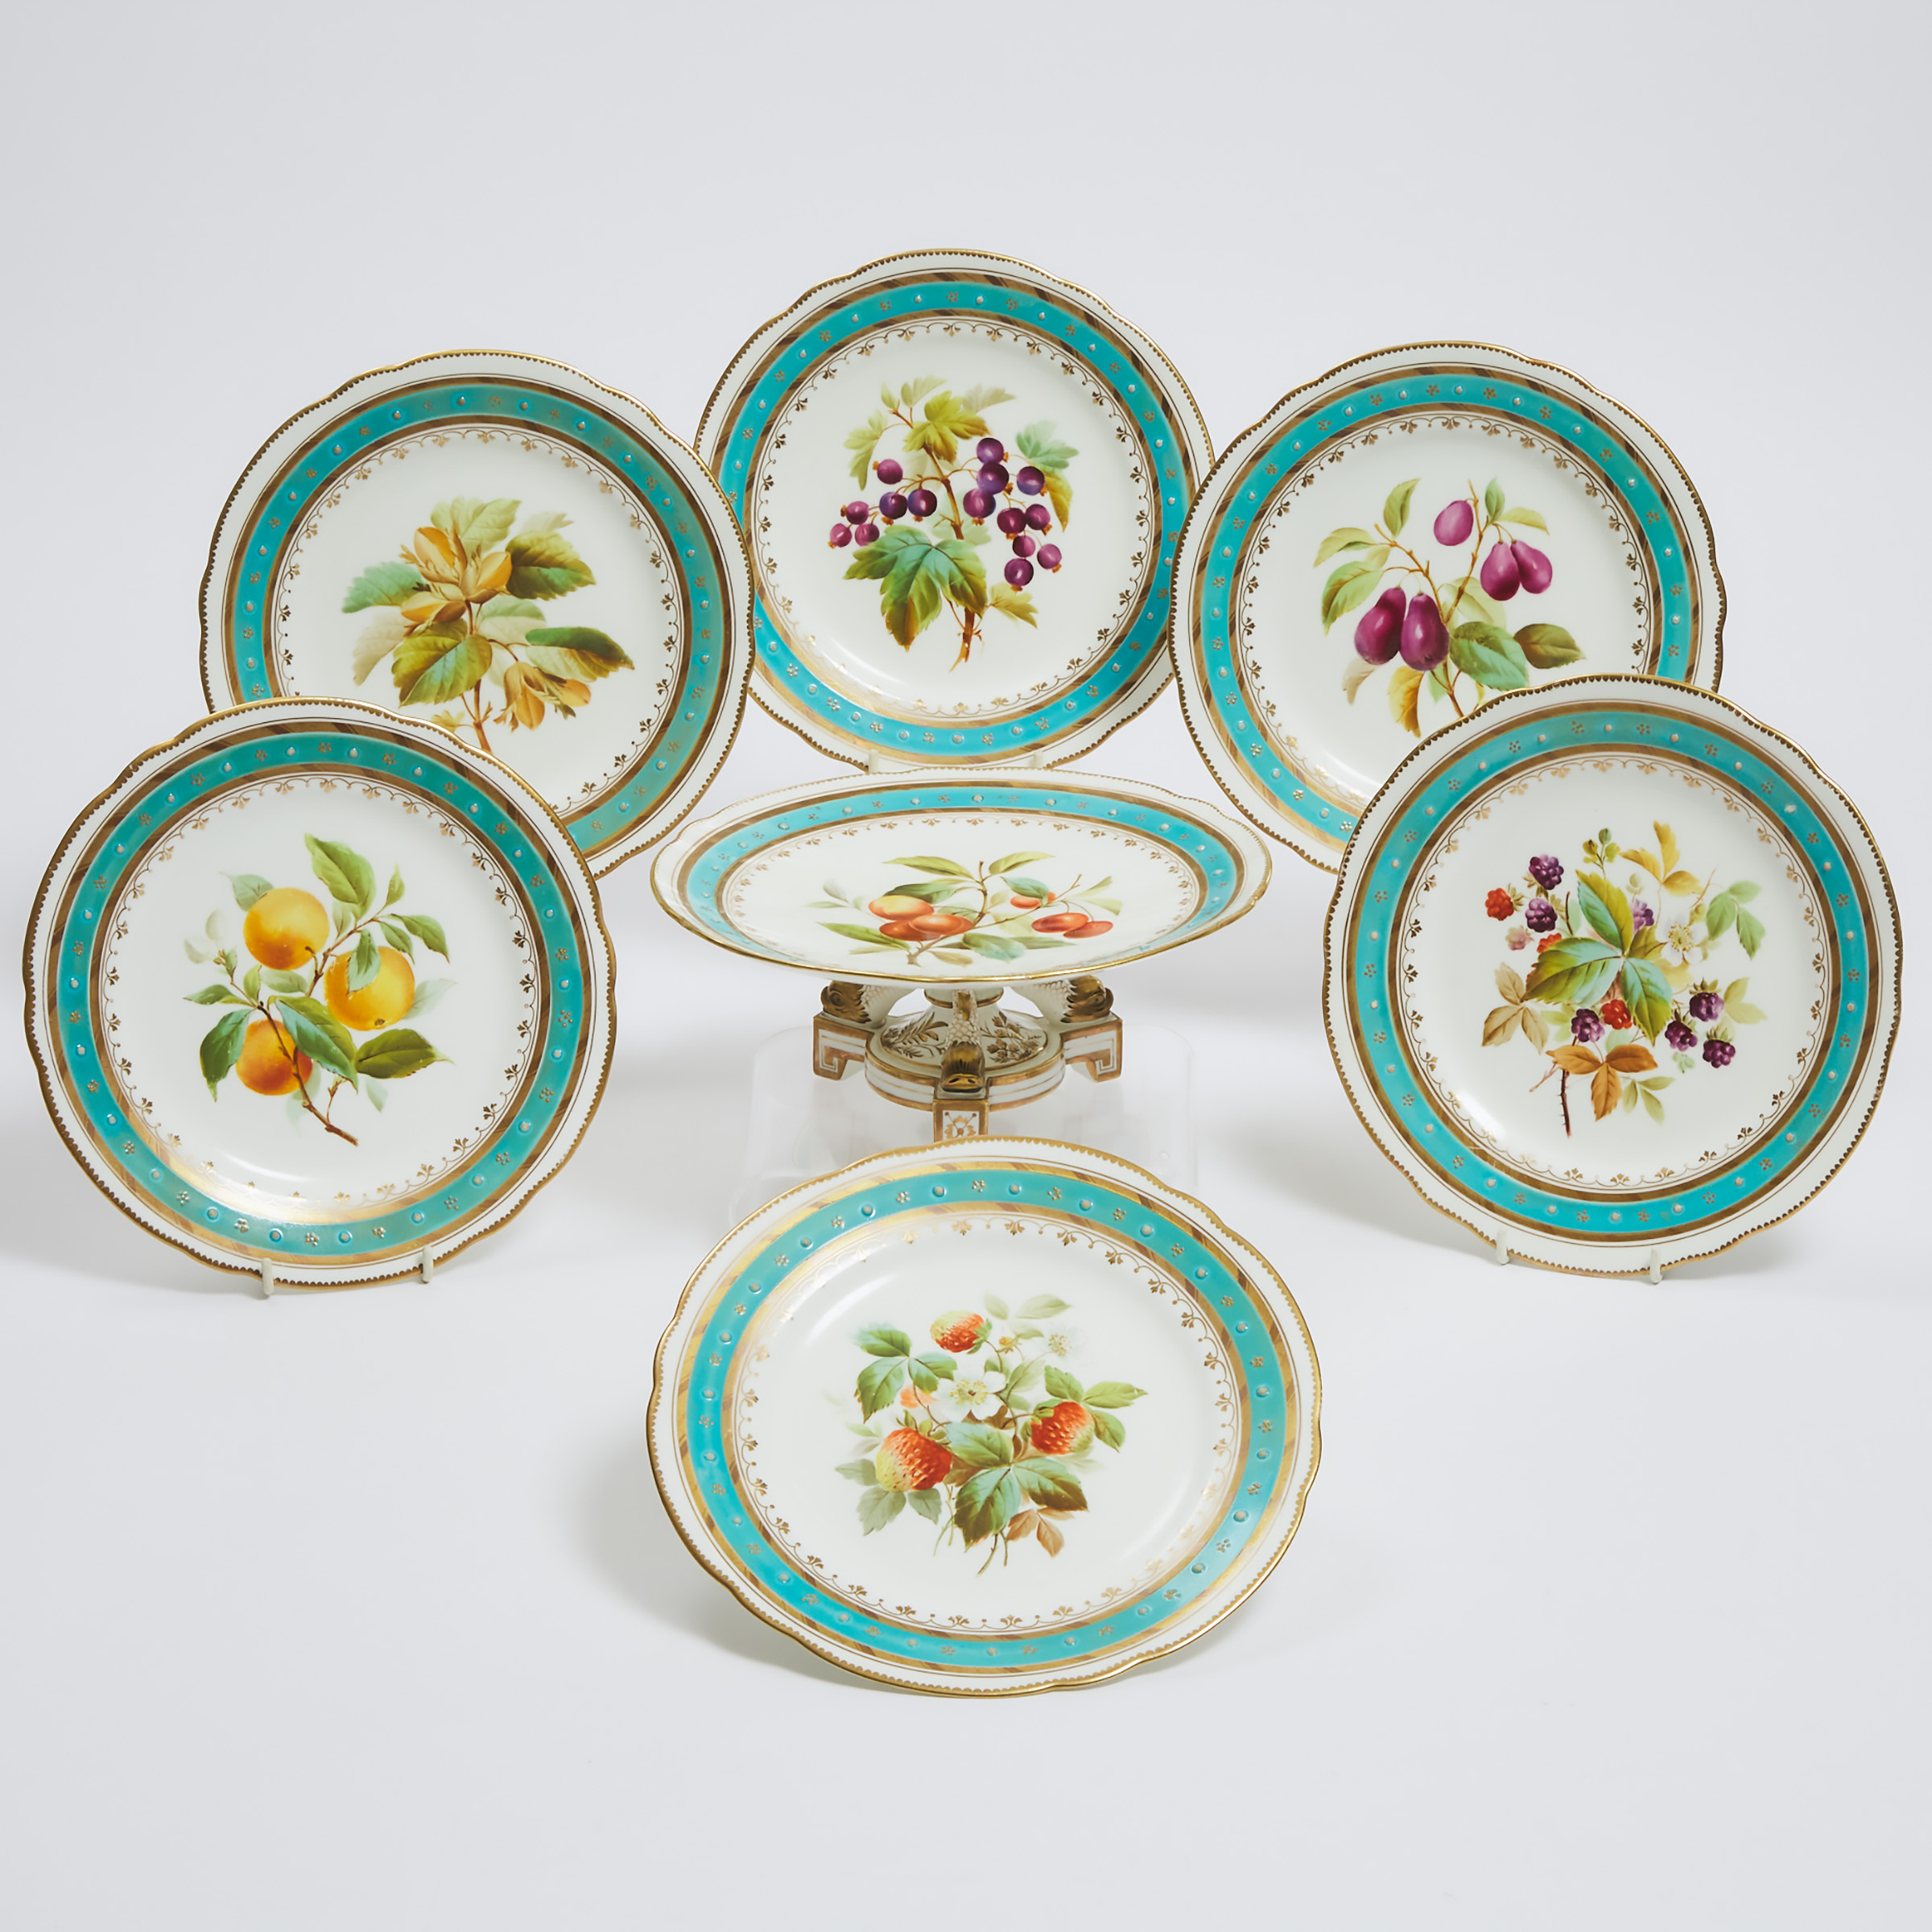 English Porcelain Turquoise and Gilt Banded Dessert Service, late 19th century